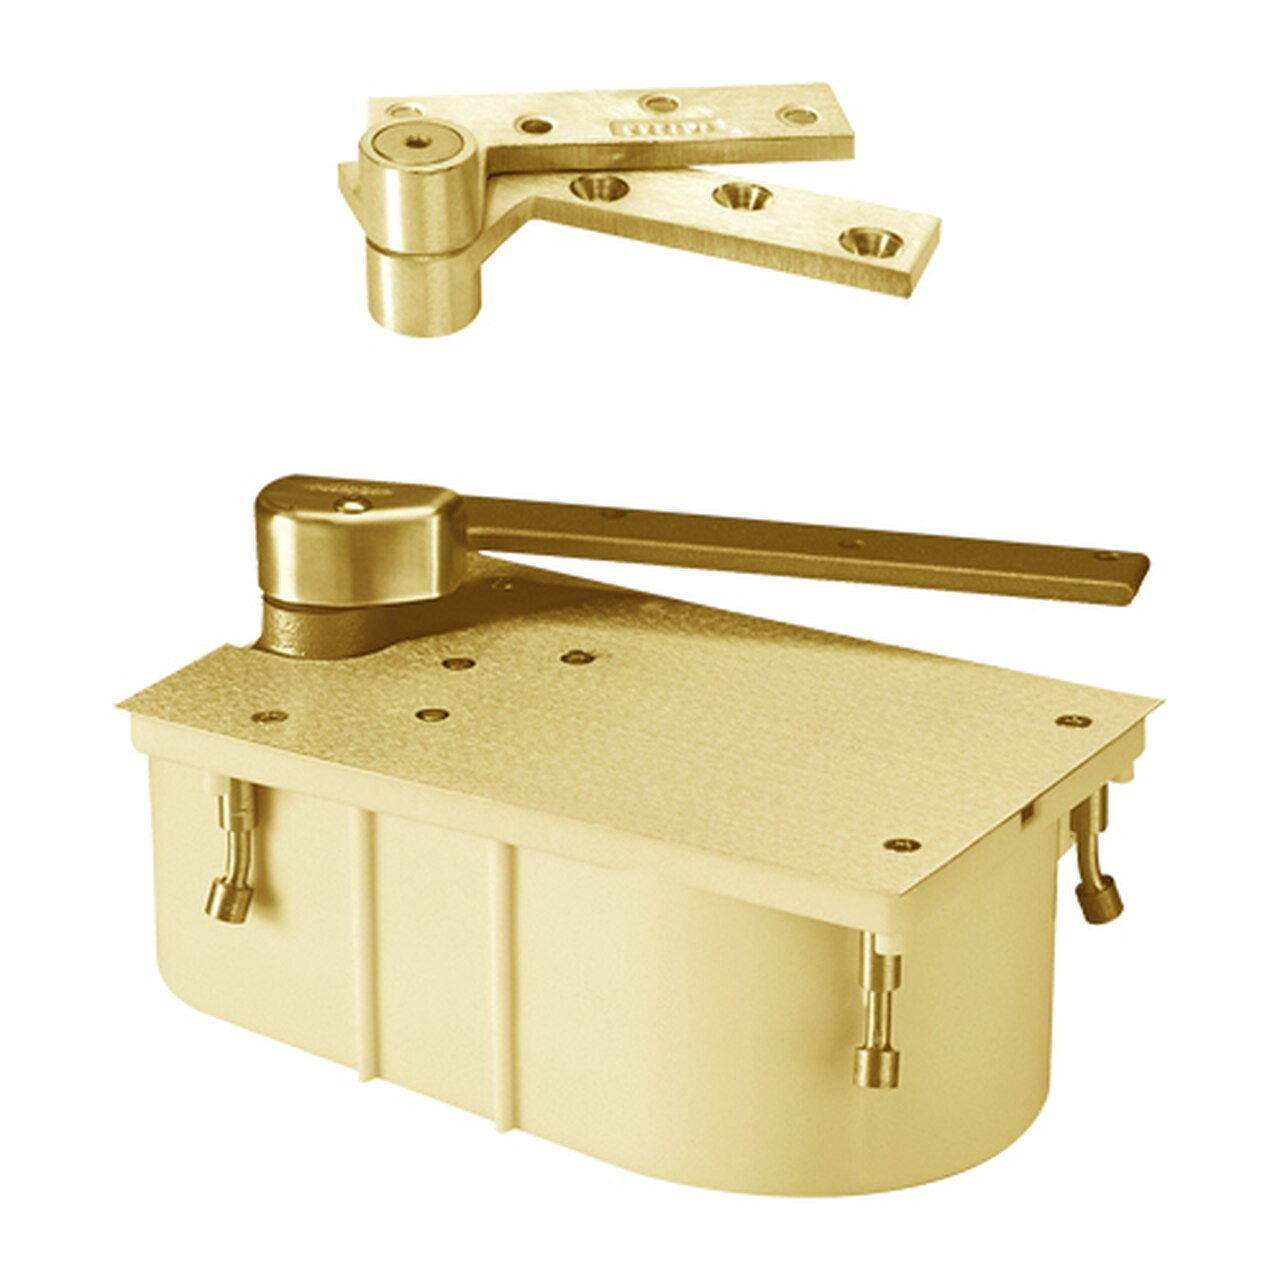 F27-105N-LTP-LH-605 Rixson 27 Series Fire Rated Heavy Duty 3/4" Offset Hung Floor Closer in Bright Brass Finish